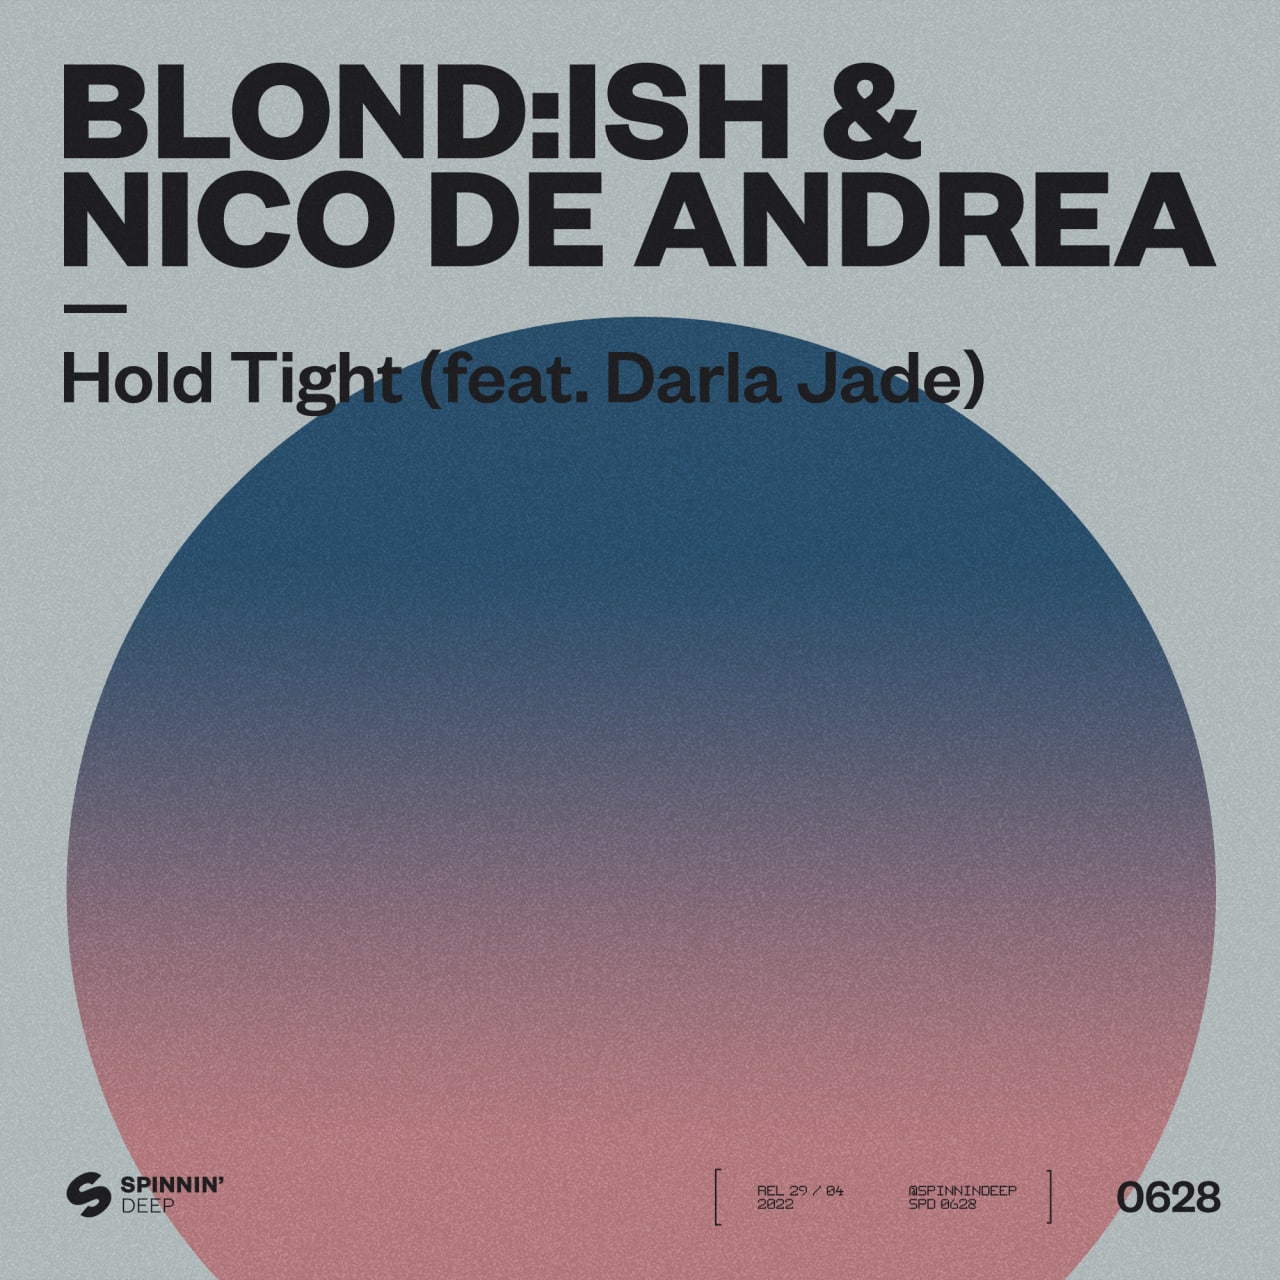 Blond:ish & Nico De Andrea - Hold Tight feat. Darla Jade (Extended Mix)